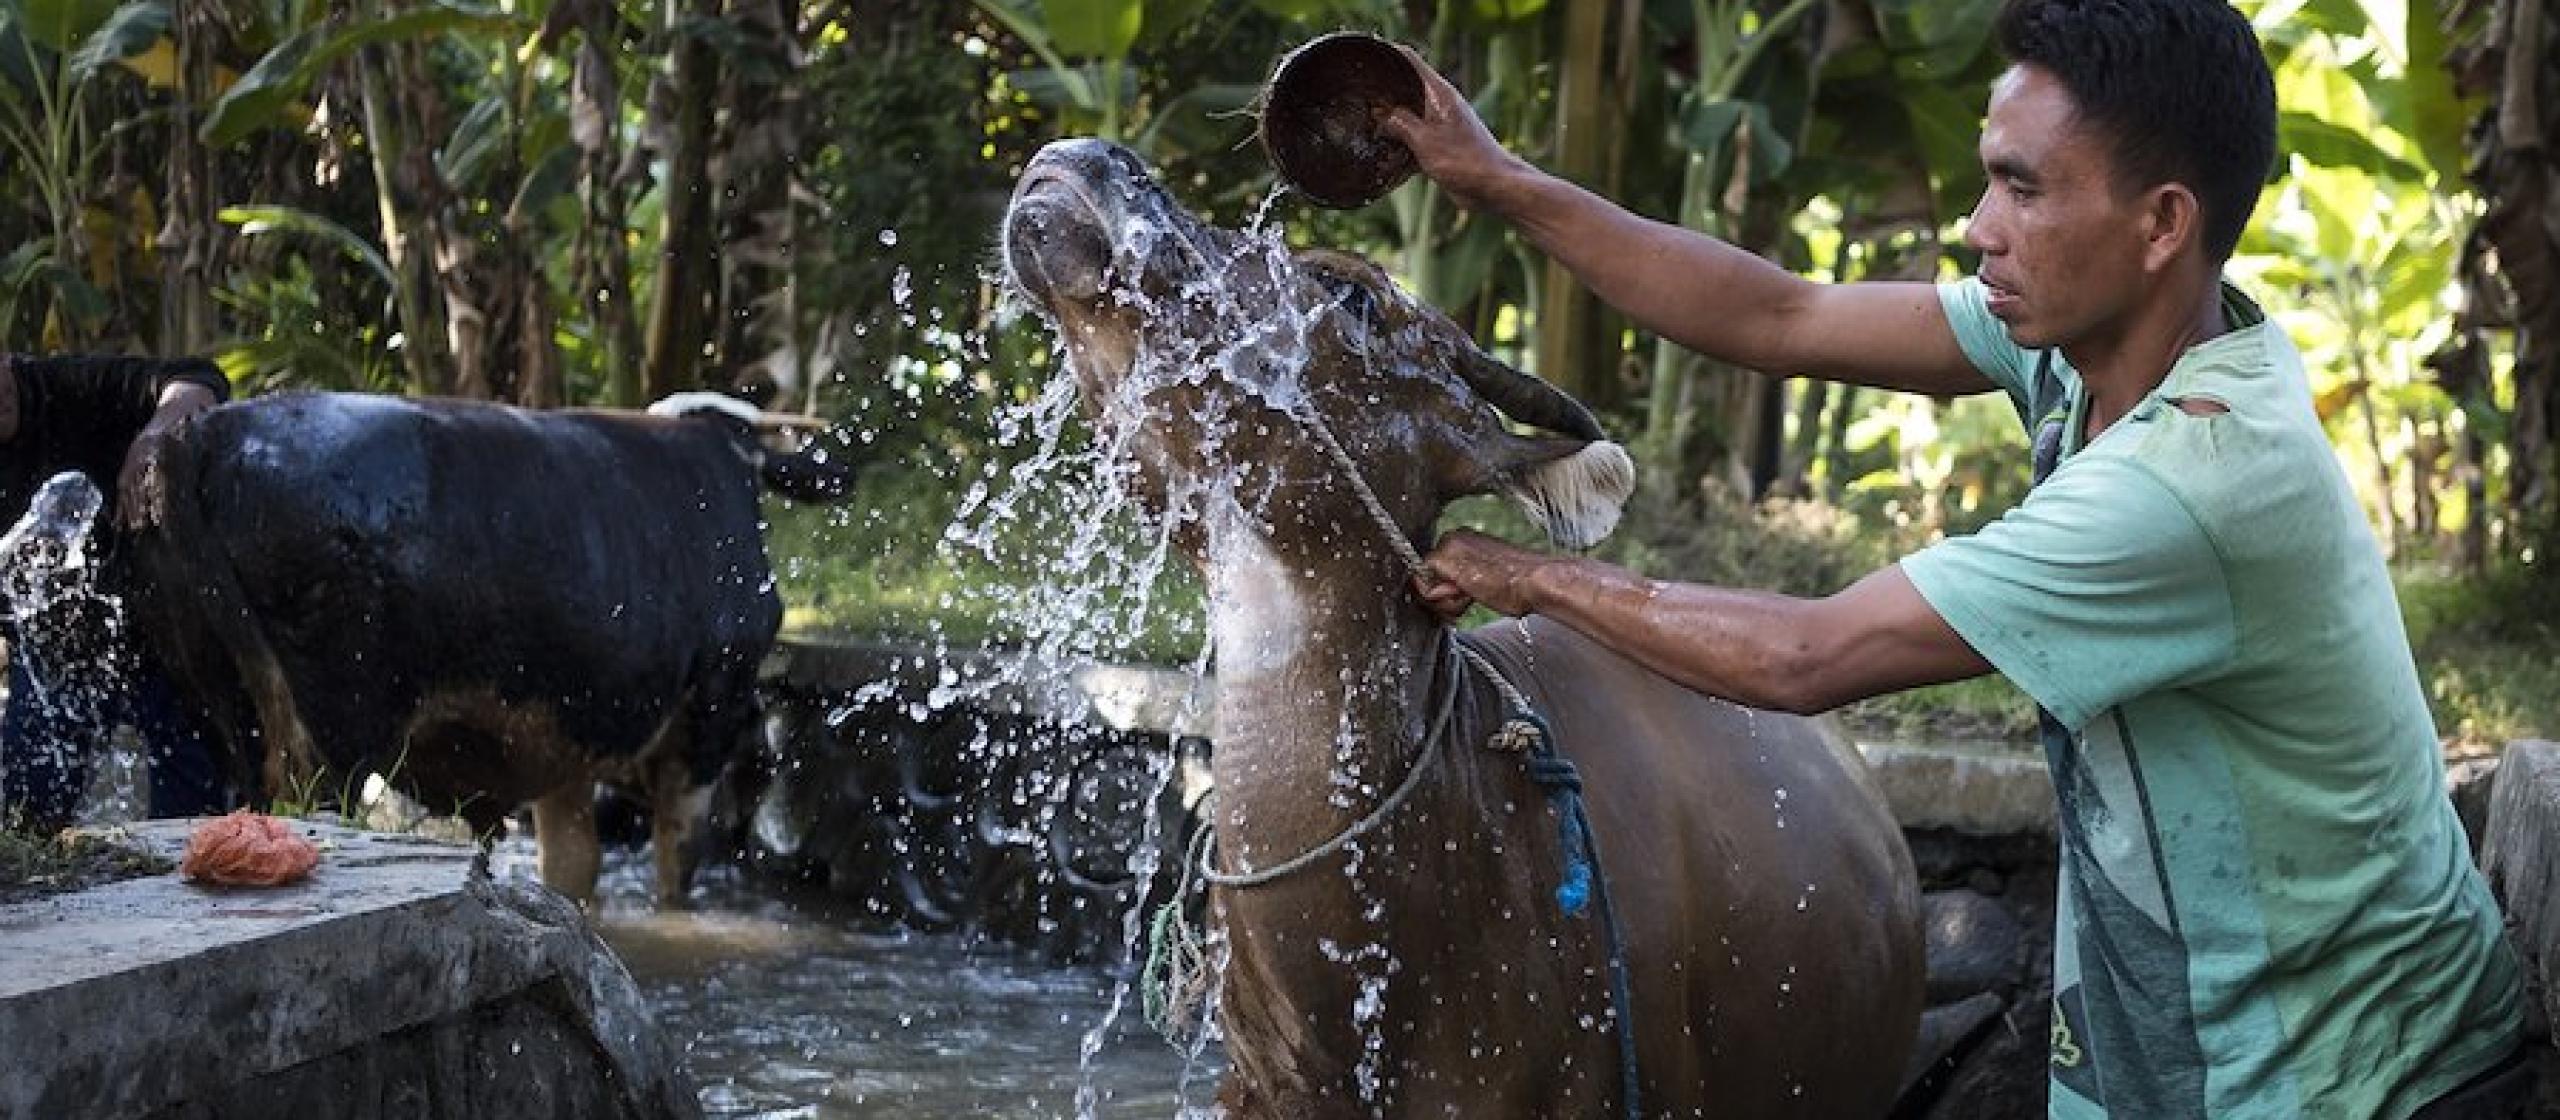 Hardiyanto, a cattle farmer in Lombok, Indonesia, washes his cattle in a small creek. He is participating in an ACIAR-funded/University of Queensland project to improve cattle fattening systems based on forage tree legume diets. Credit: Conor Ashleigh